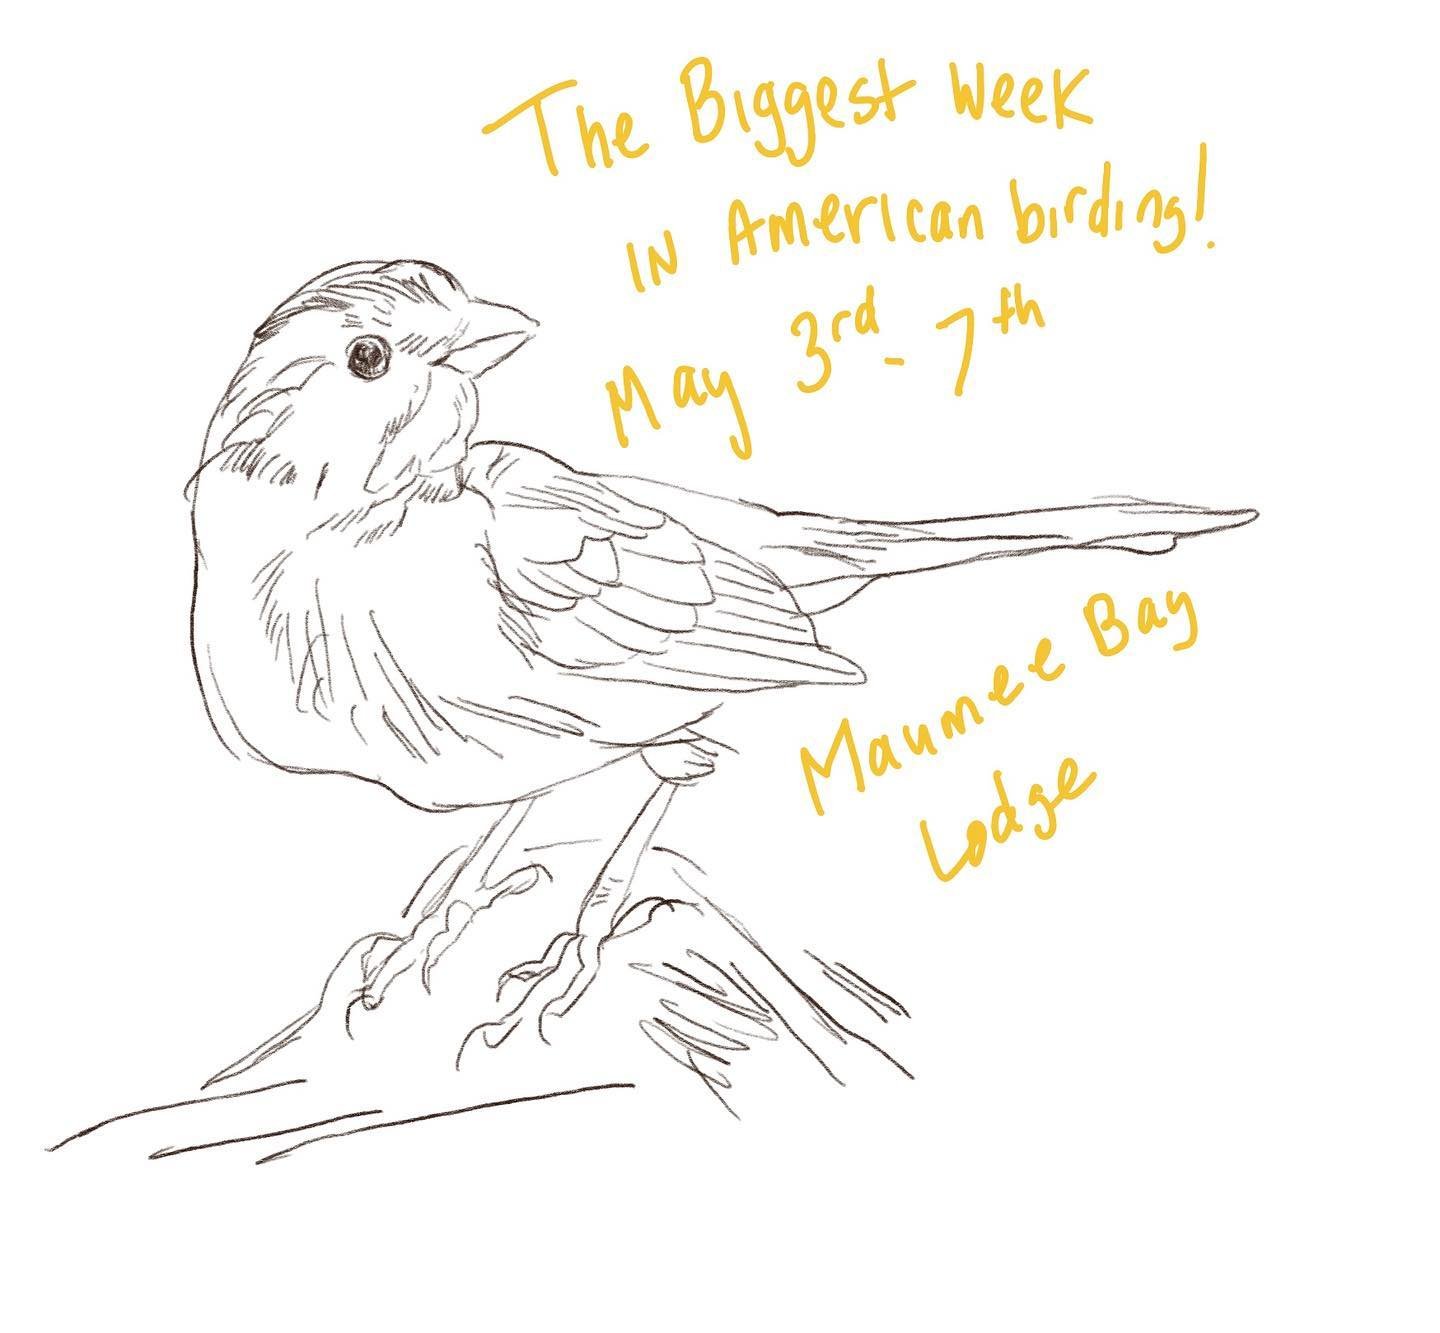 Friday May 3rd kicks off the biggest week in american birding. If you are attending, be sure to top by between friday may 3rd to tuesday may 7th and say hello! I will have a vendor spot (near the lounge) with paintings and prints. My studio is a comp